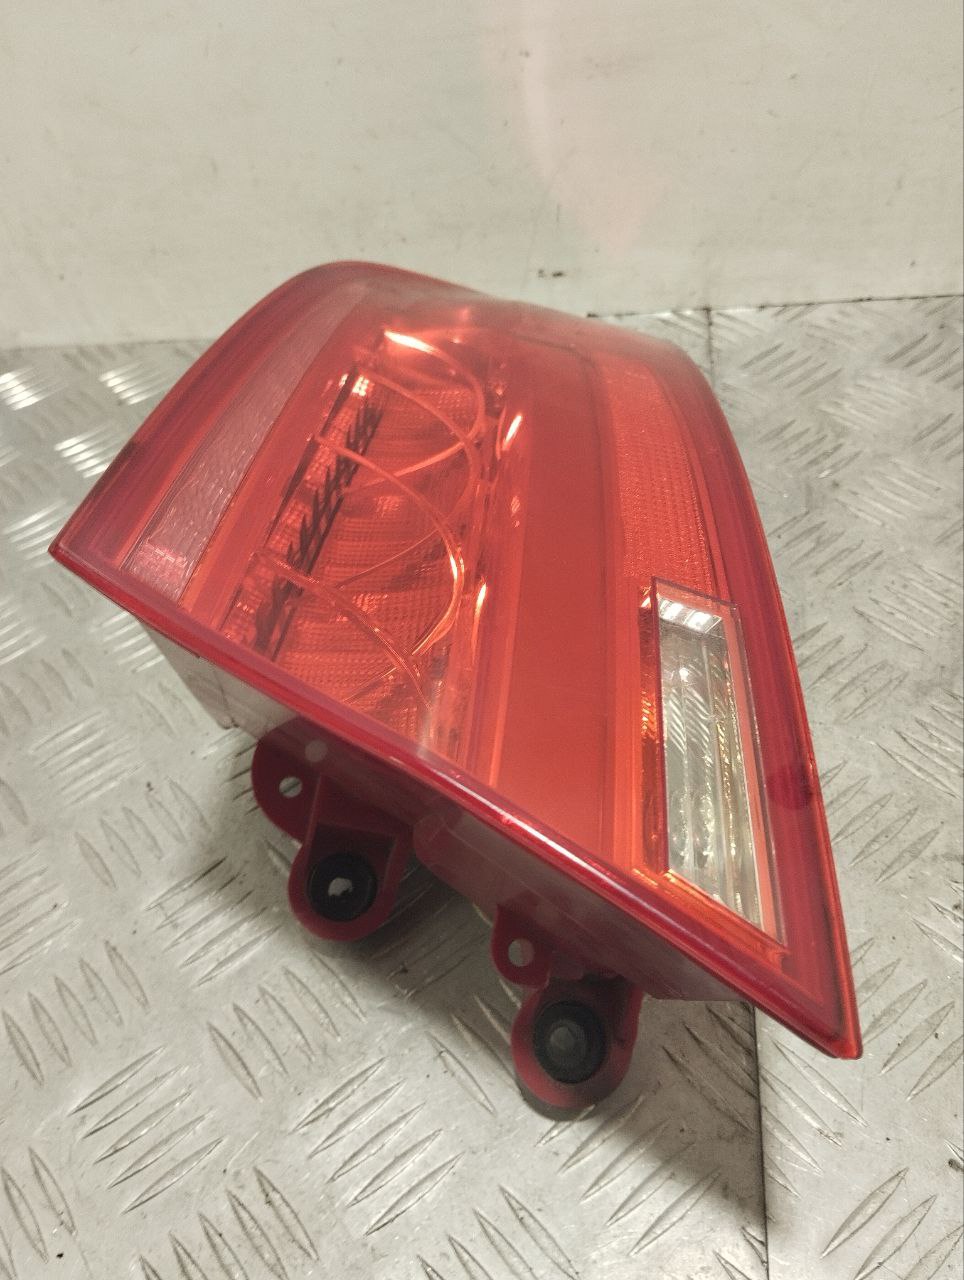 AUDI A7 C7/4G (2010-2020) Rear Right Taillight Lamp 4G8945096A 23493337